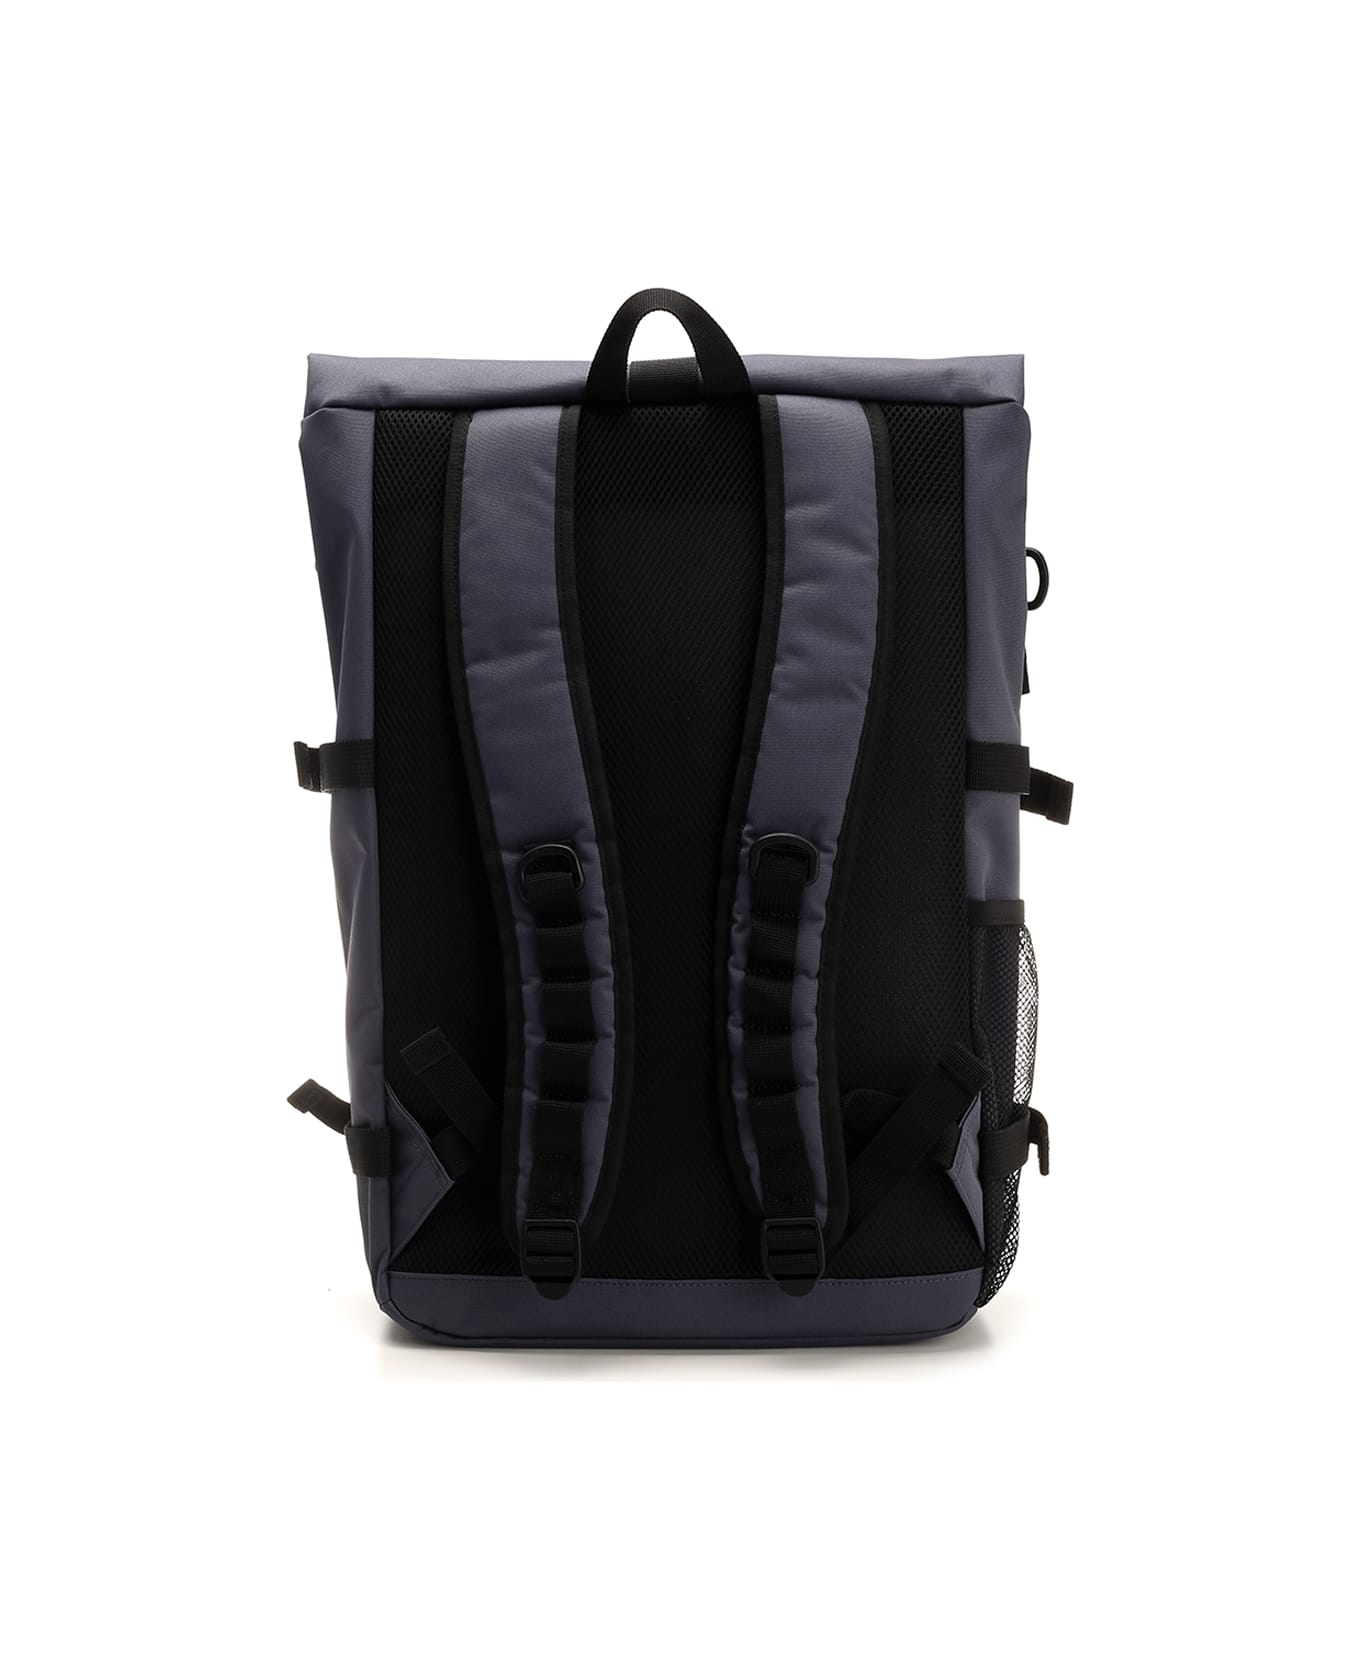 Carhartt Anthracite Grey 'philis' Backpack - Grigio バックパック